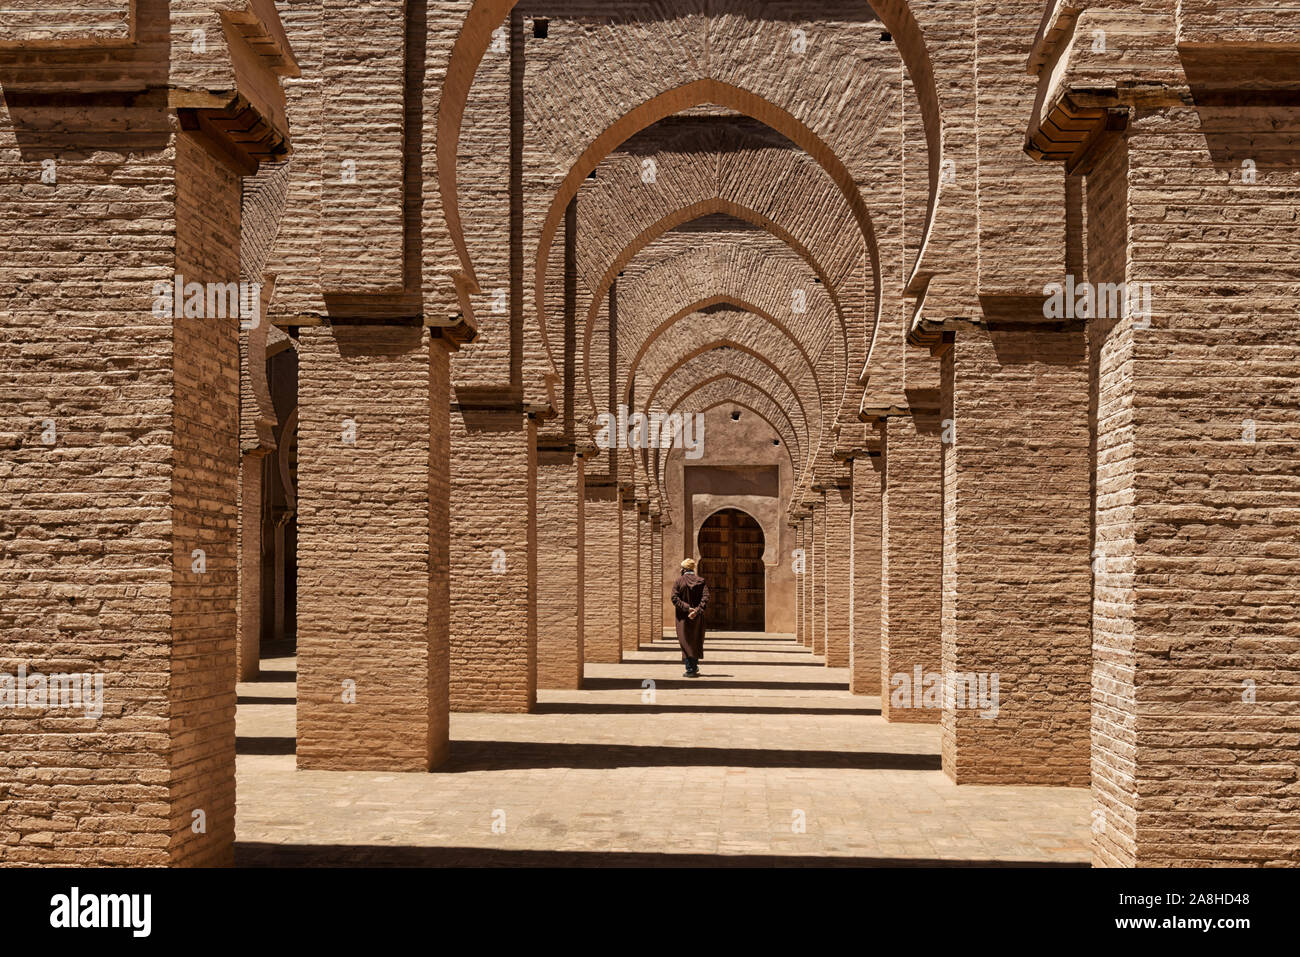 Traditional dressed man walks inside the Tinmal mosque, Morocco. Stock Photo